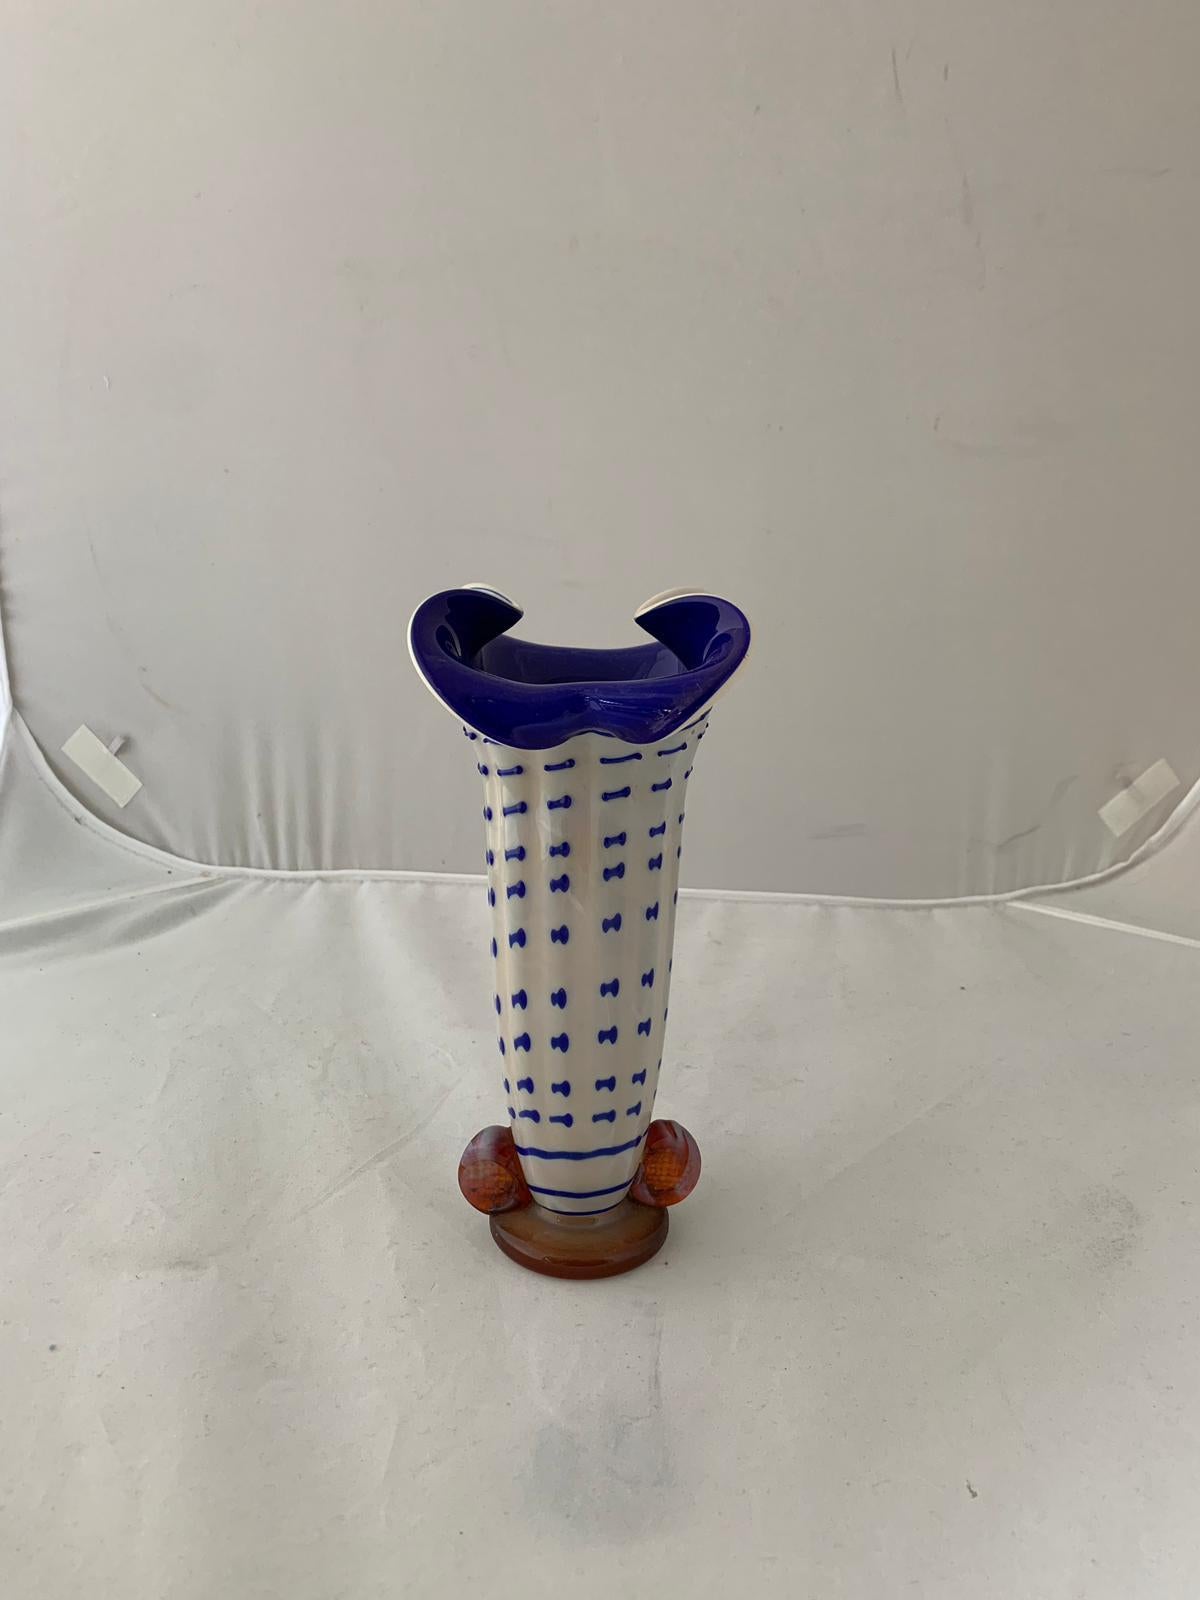 Vase in lattimo glass in zinc sulphide decorated and blue coated, the base and the two stapled supports in honey-cognac glass shaded lattimo, the vase is decorated with dotted lines towards the mouth and become material and join together circuiting